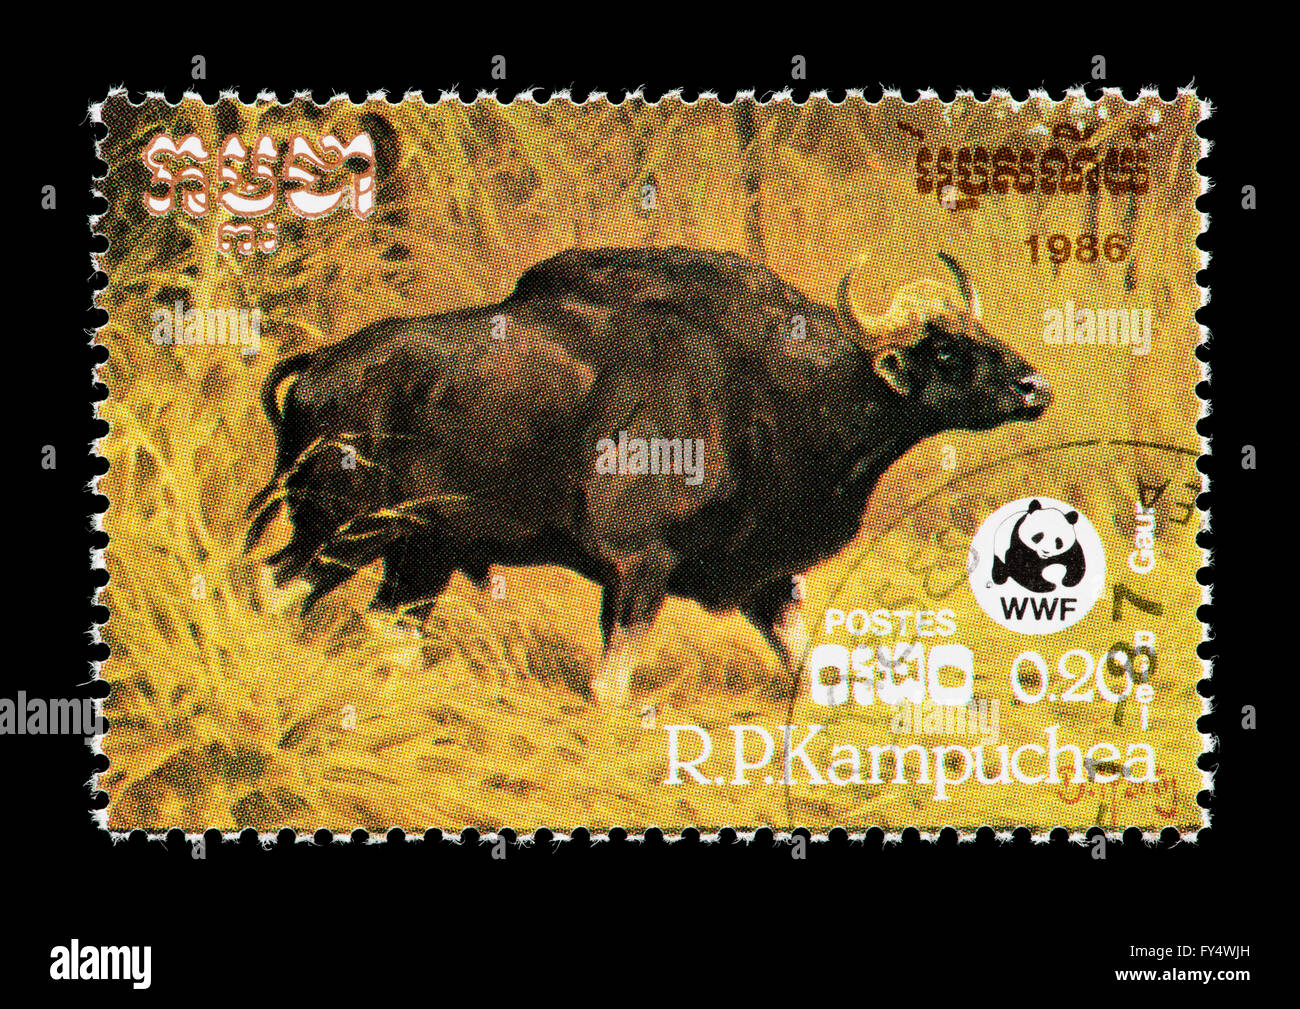 Postage stamp from Cambodia (Kampuchea) depicting a gaur (Bos gaurus) Stock Photo